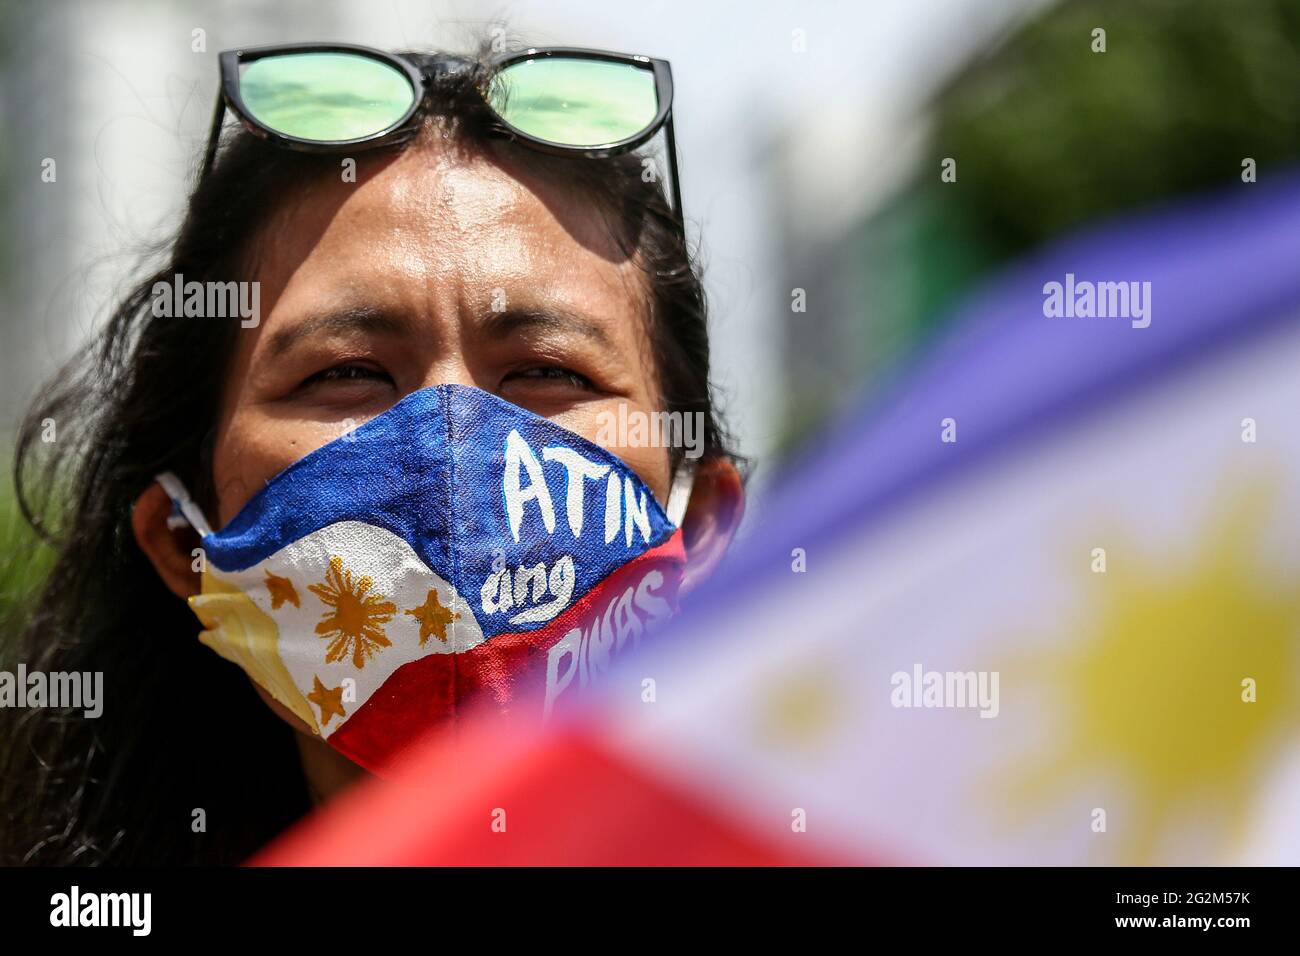 Metro Manila, Philippines. 12th June 2021. A woman wears a mask bearing the Philippine flag with a sign 'Atin Ang Pinas' during a protest marking Independence Day in front of the Chinese consulate in the financial district of Makat. Various groups called on China to stop its maritime activities in the disputed South China Sea, which endangers peace and stability in the region. Credit: Majority World CIC/Alamy Live News Stock Photo